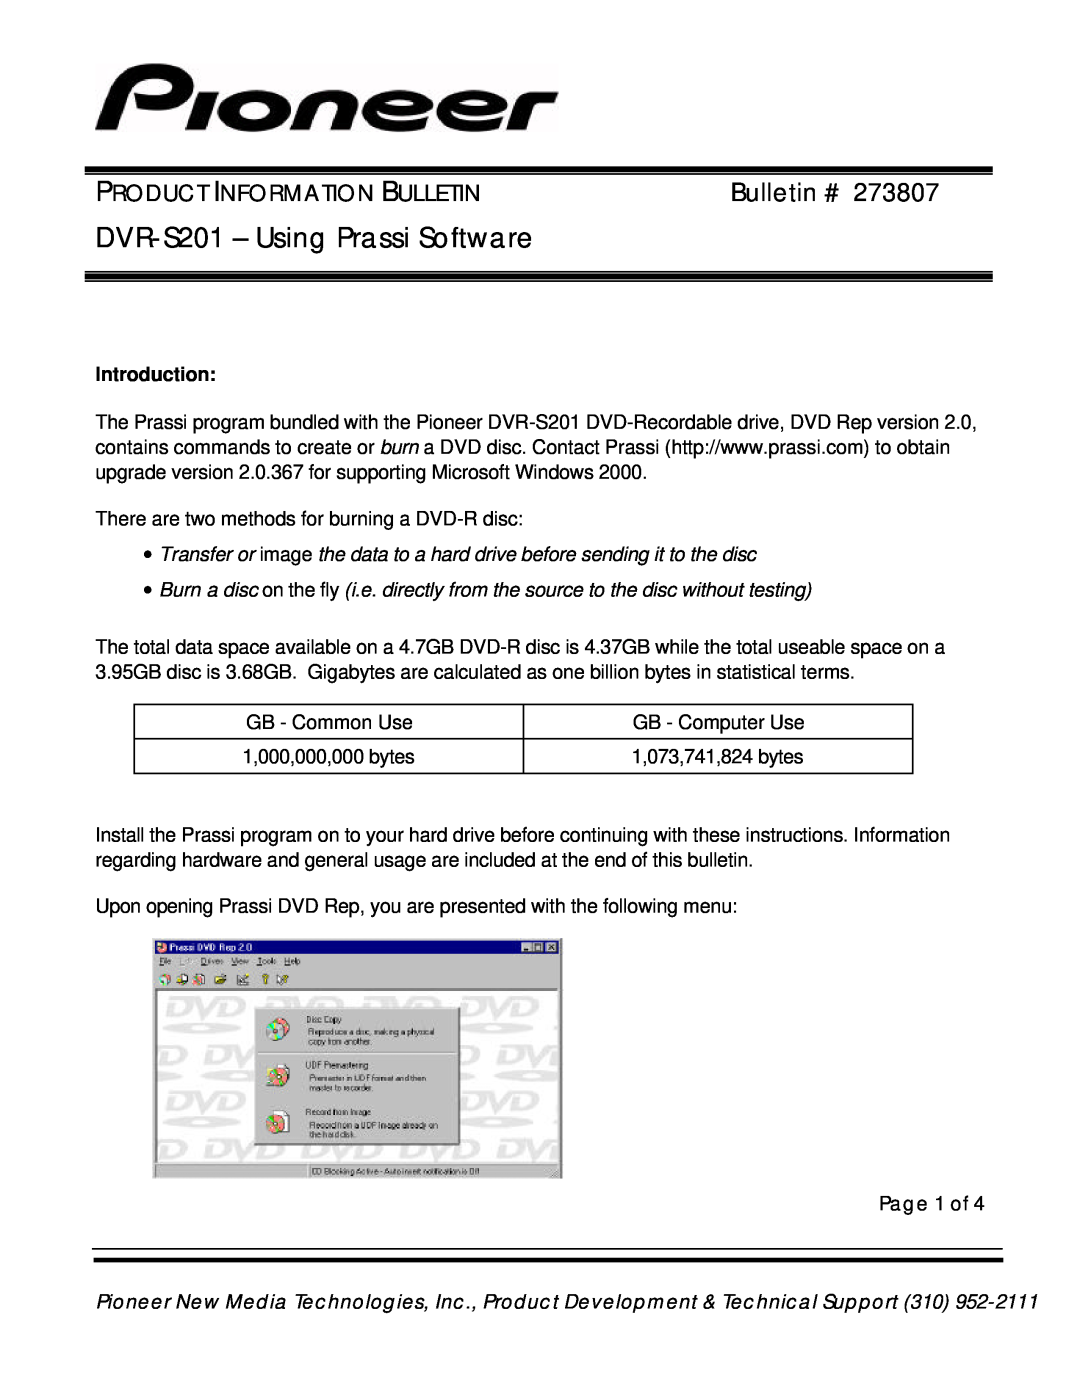 Pioneer manual Product Information Bulletin, Introduction, Page 1 of, DVR-S201 - Using Prassi Software, Bulletin # 